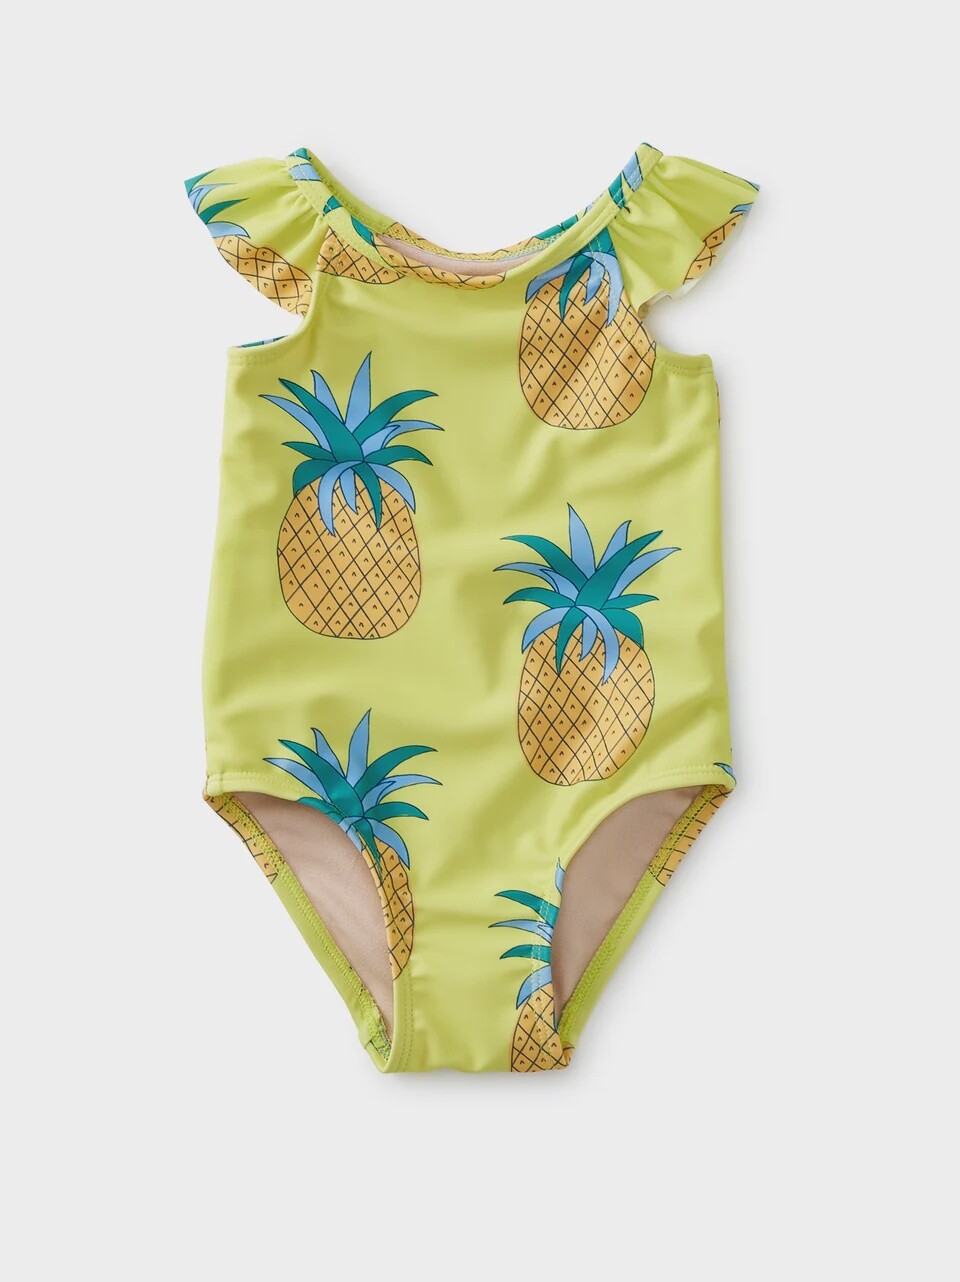 One-Piece Baby Swimsuit, Colour: Pineapple Parade in Yellow, Size: 12-18M